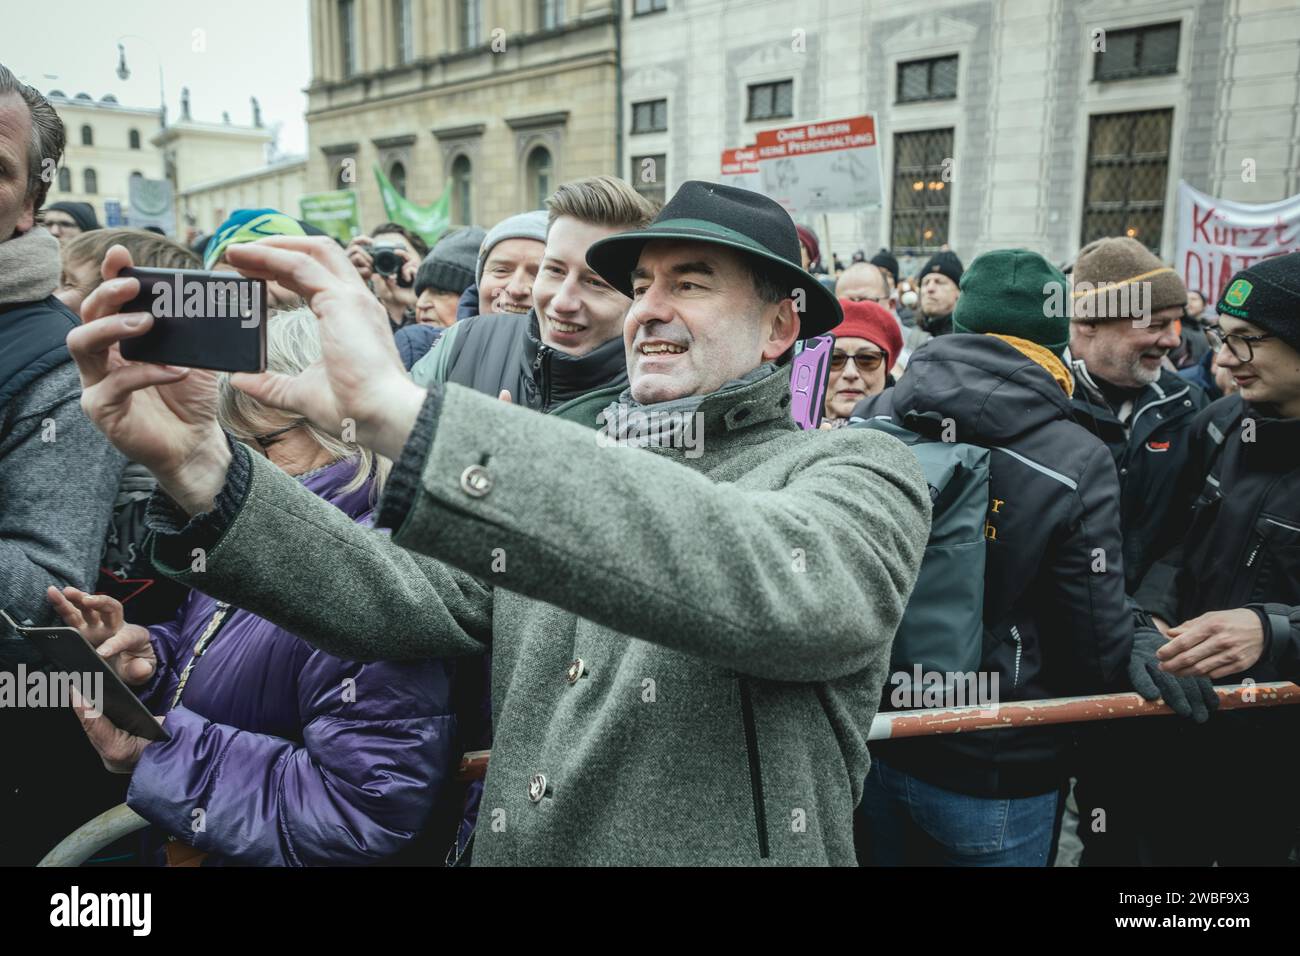 Vice President and Minister of Economic Affairs Hubert Aiwanger takes a selfie with a demonstrator at the rally, farmers' protest, Odeonsplatz Stock Photo